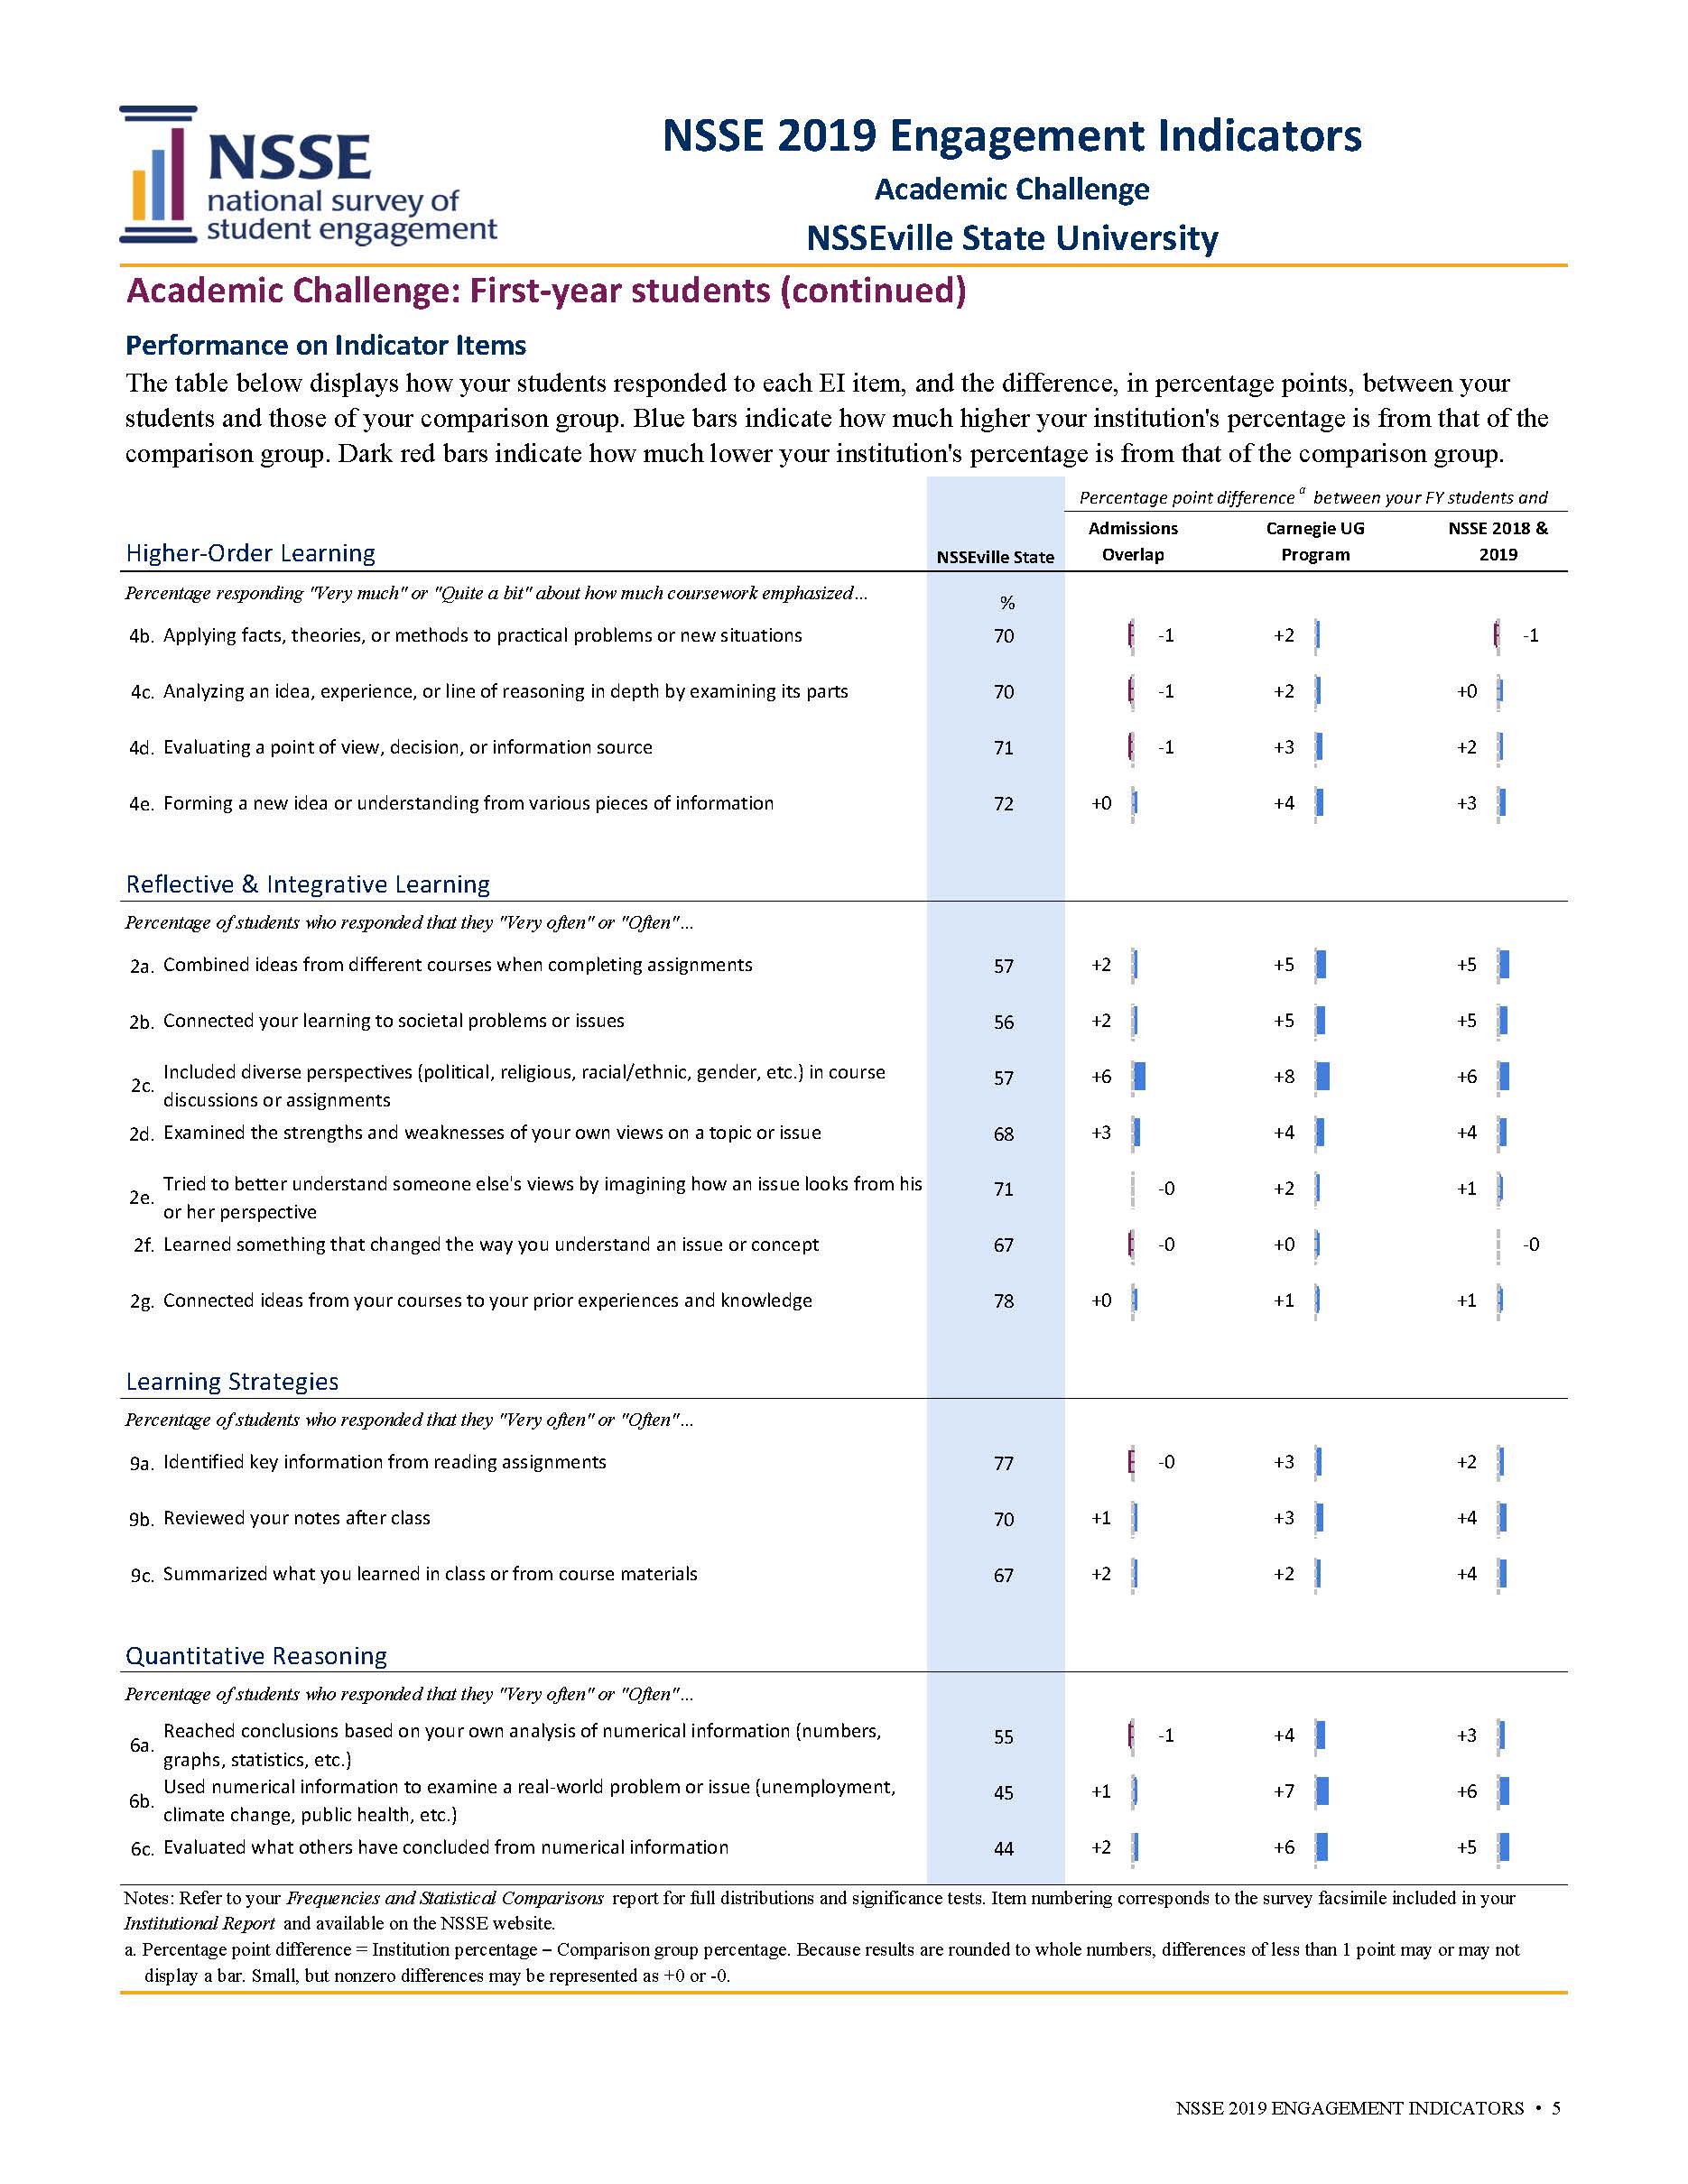 Sample Report: page 5 of NSSE Engagement Indicators